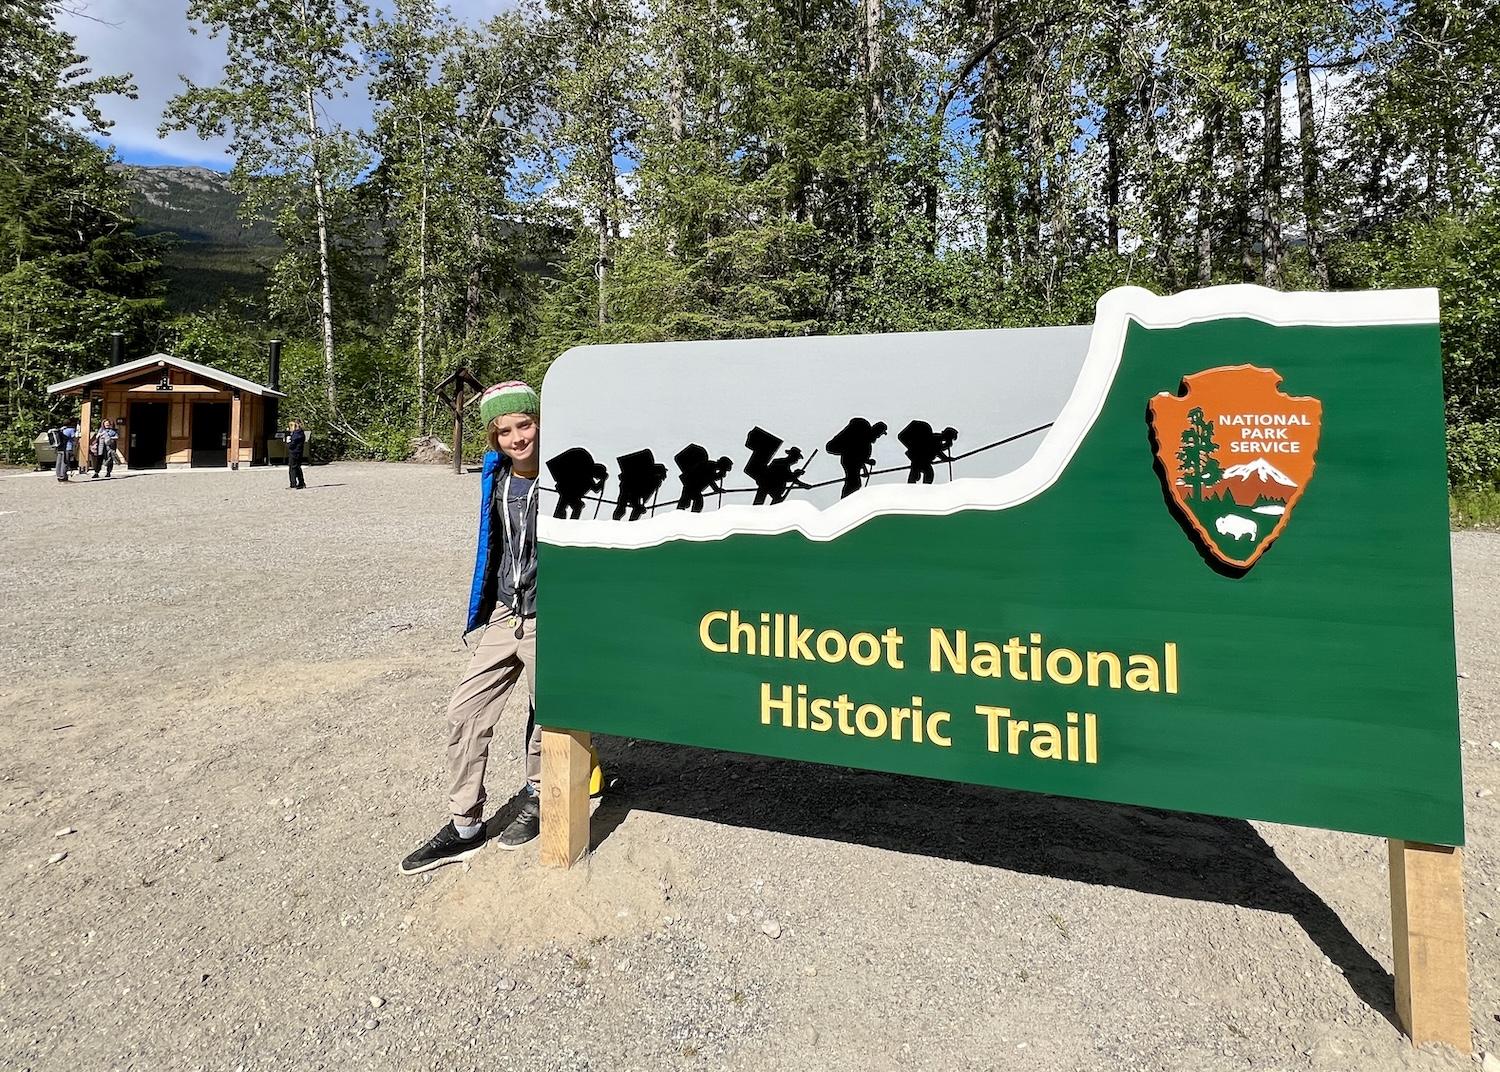 In 2022, the Chilkoot Trail in Alaska was officially designated the Chilkoot National Historic Trail.